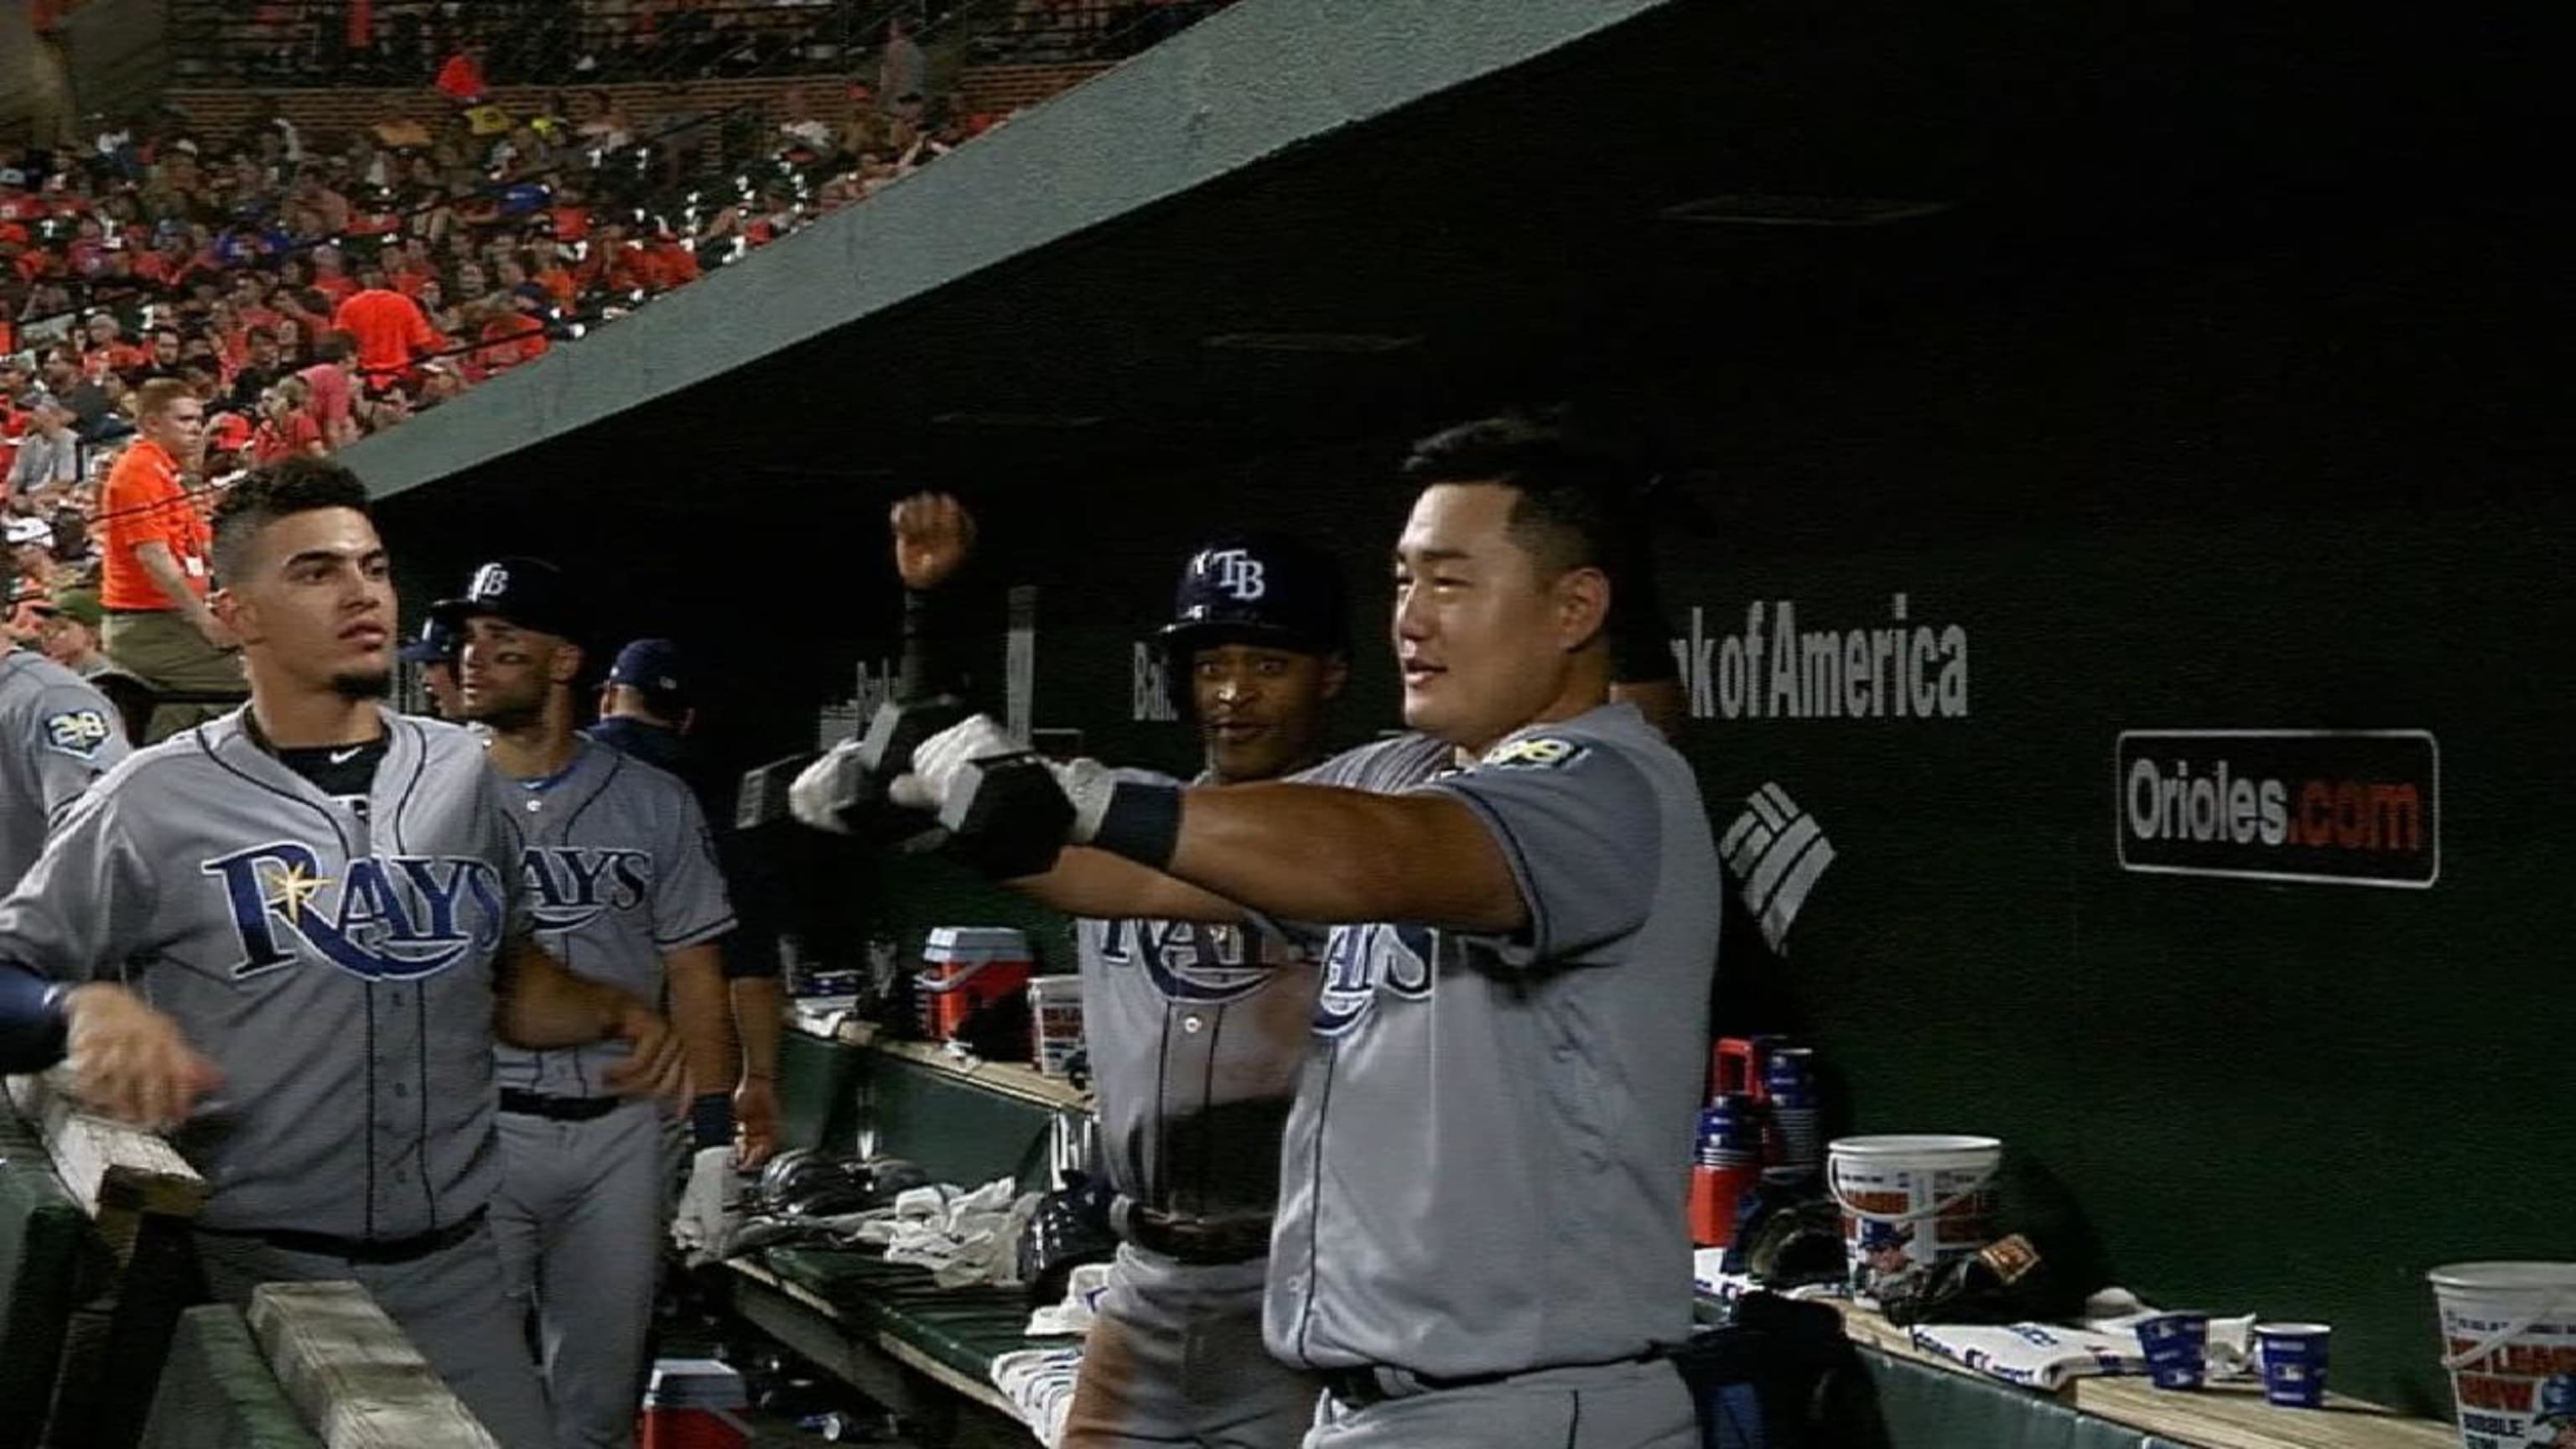 Ji-Man Choi lifted weights in the Rays' dugout after narrowly